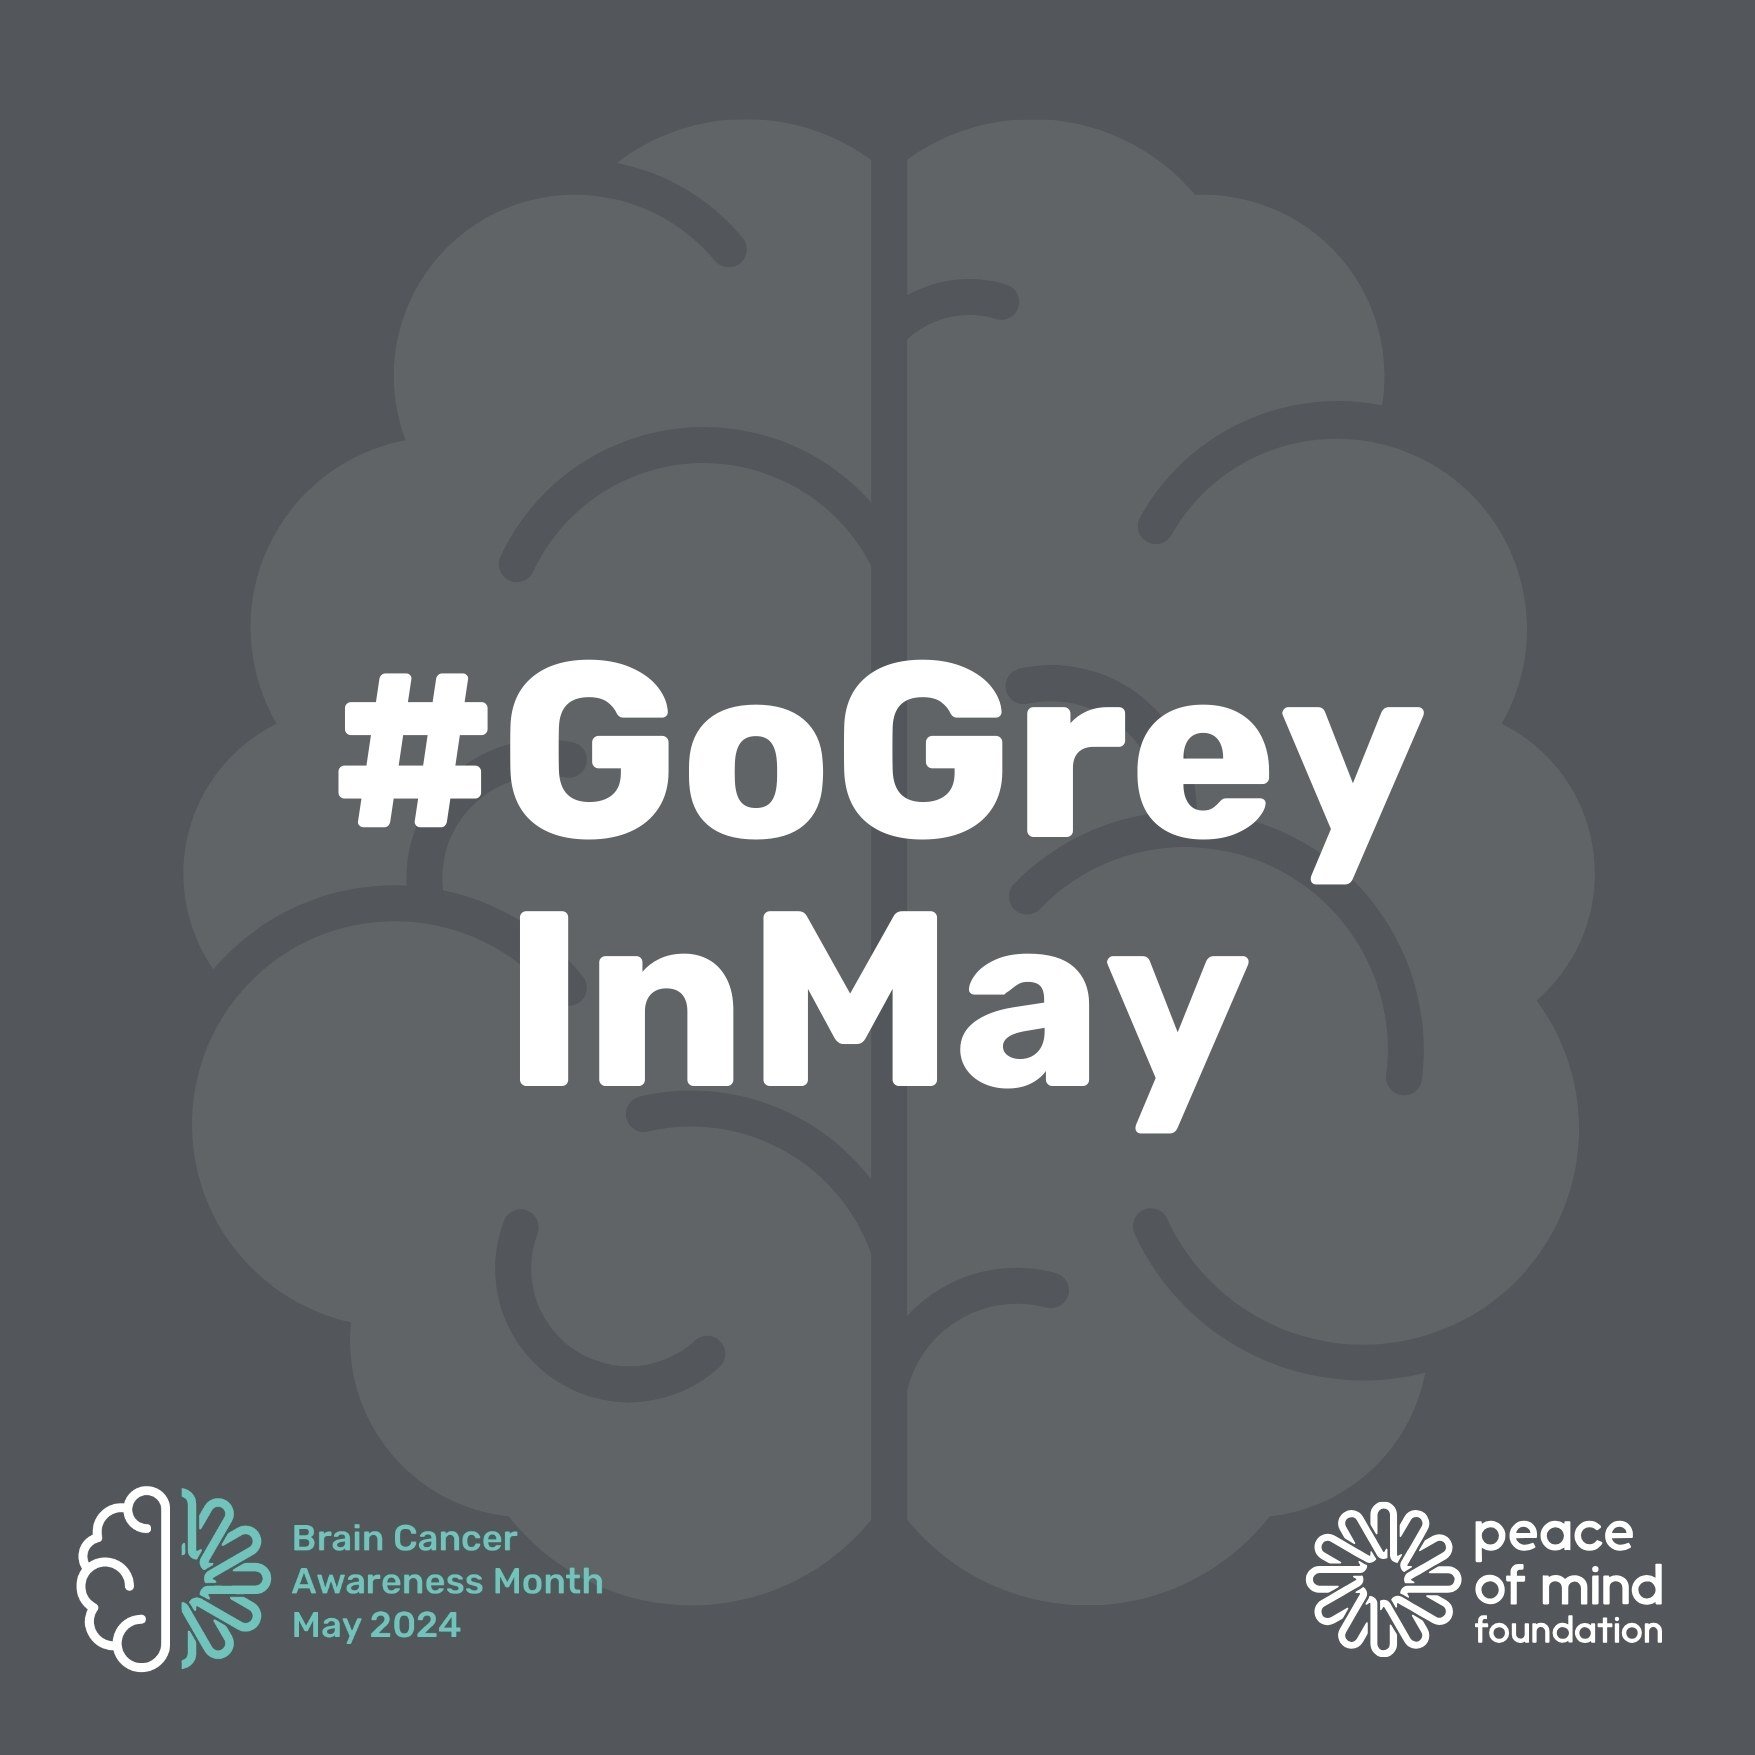 Help us fight brain cancer by Going Grey this May! 100% of proceeds from the Peace of Mind Foundation store directly fund support services for Australians fighting brain cancer (link in bio).

There will be approximately 2000 Australians diagnosed wi